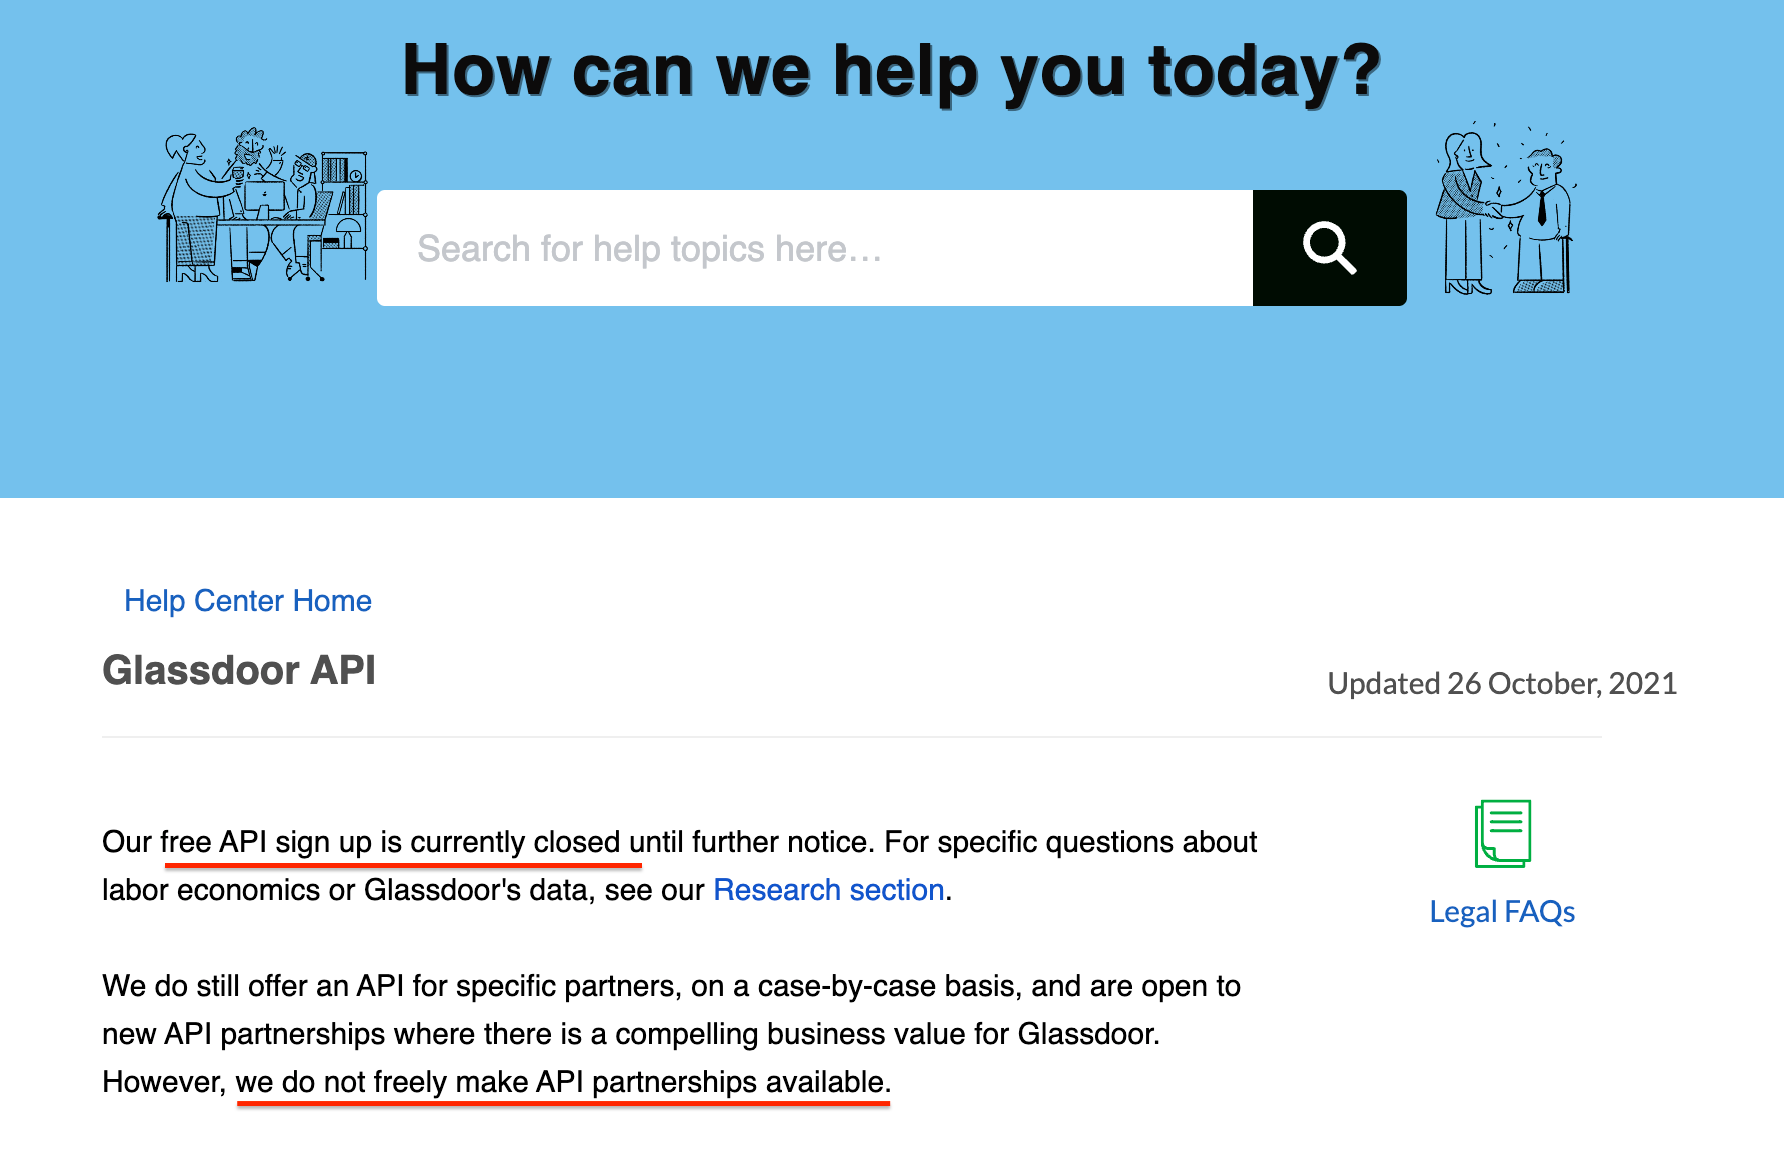 Glassdoor API is not free or freely available at the moment